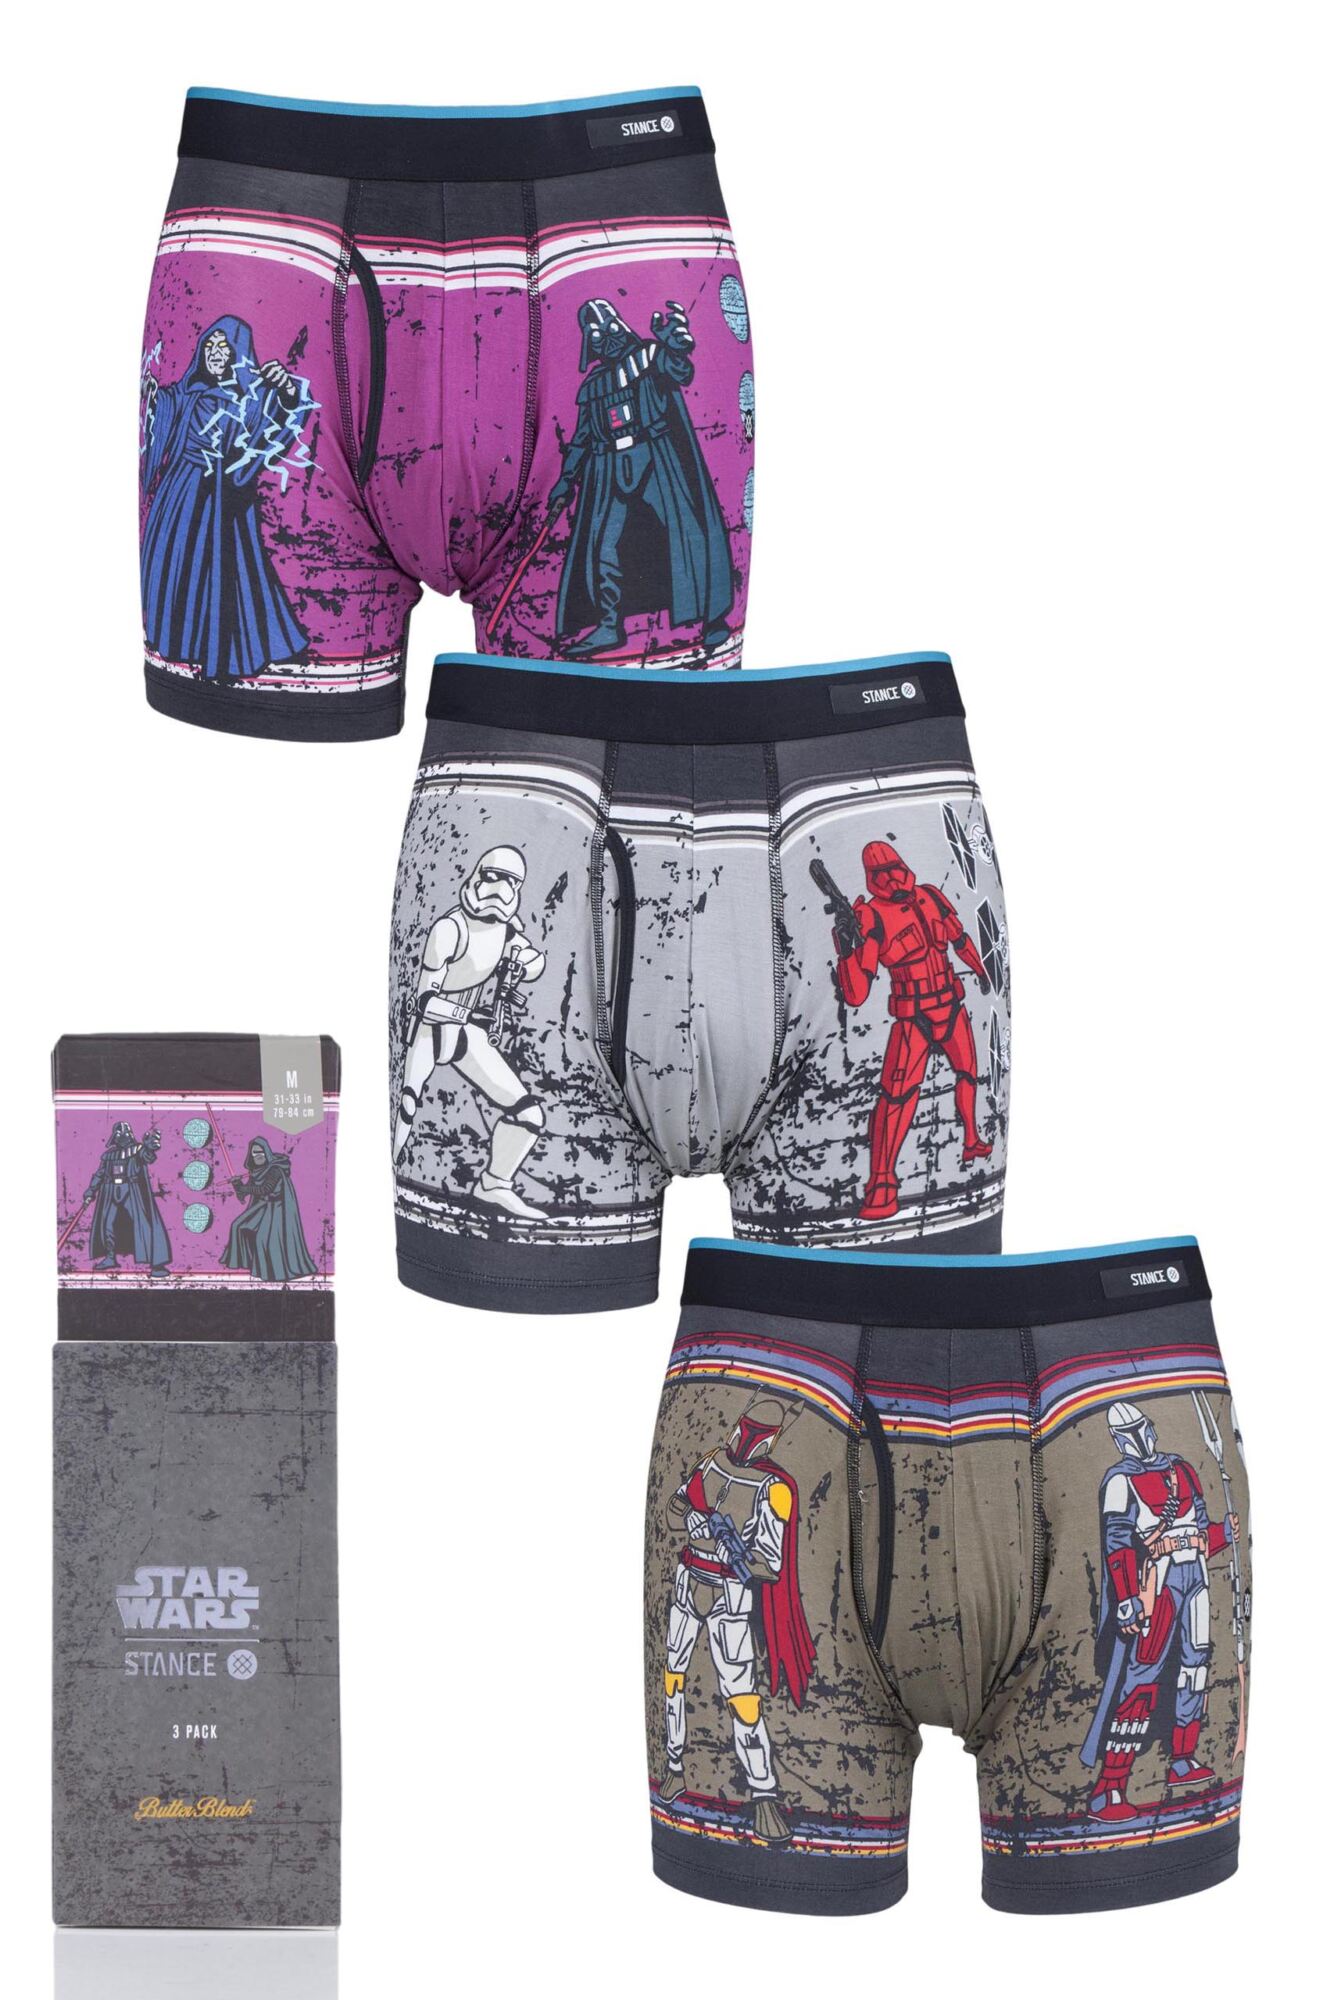 3 Pair Star Wars Collaboration Gift Boxed Boxer Shorts Men's - Stance